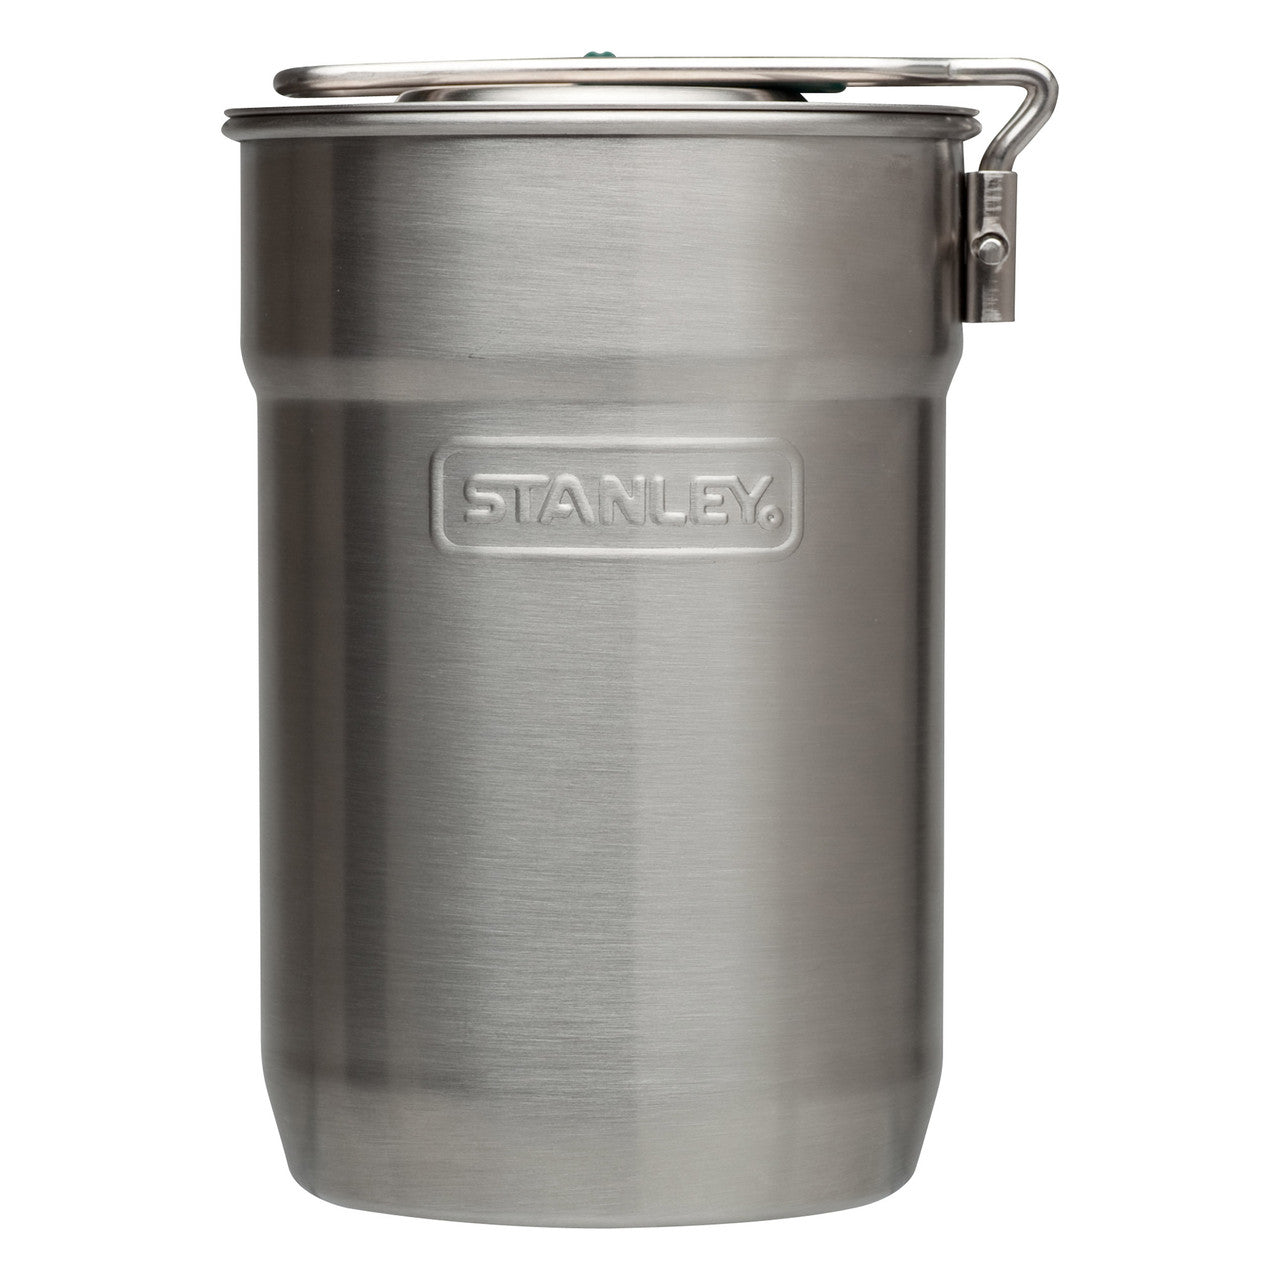 Stanley the Cool Grip Camp Percolator 1.0L Available in stock